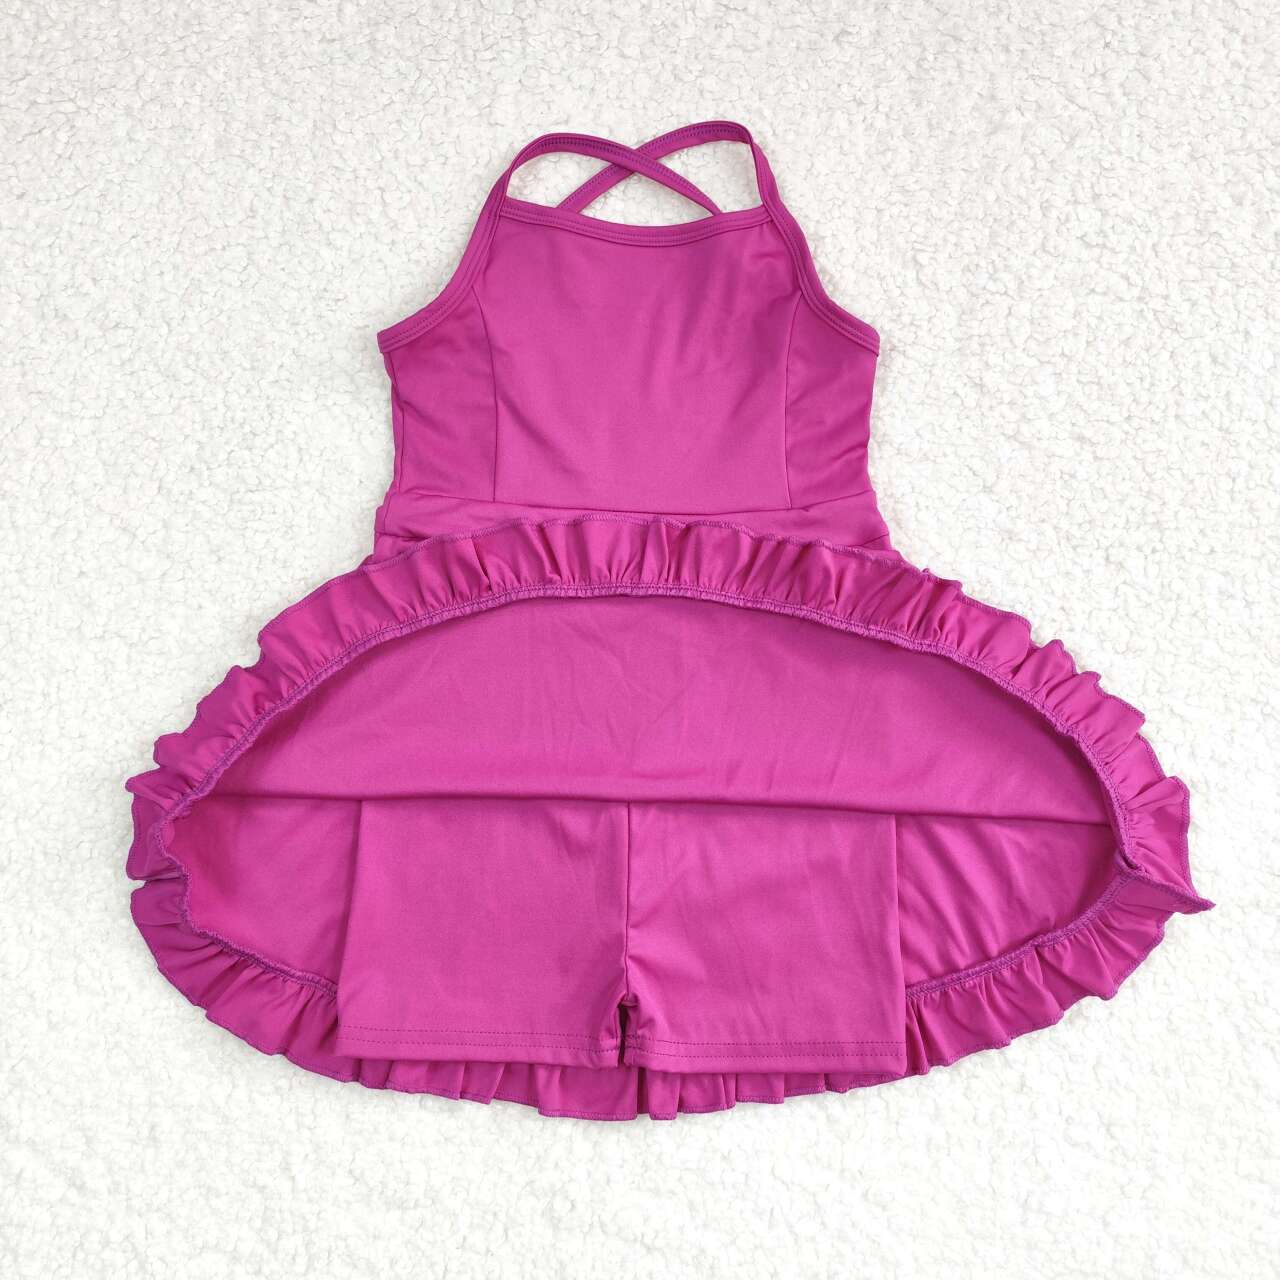 S0441 Purple Color Girls Knee Length Shorts Sports Dress 1 Pieces Swimsuits